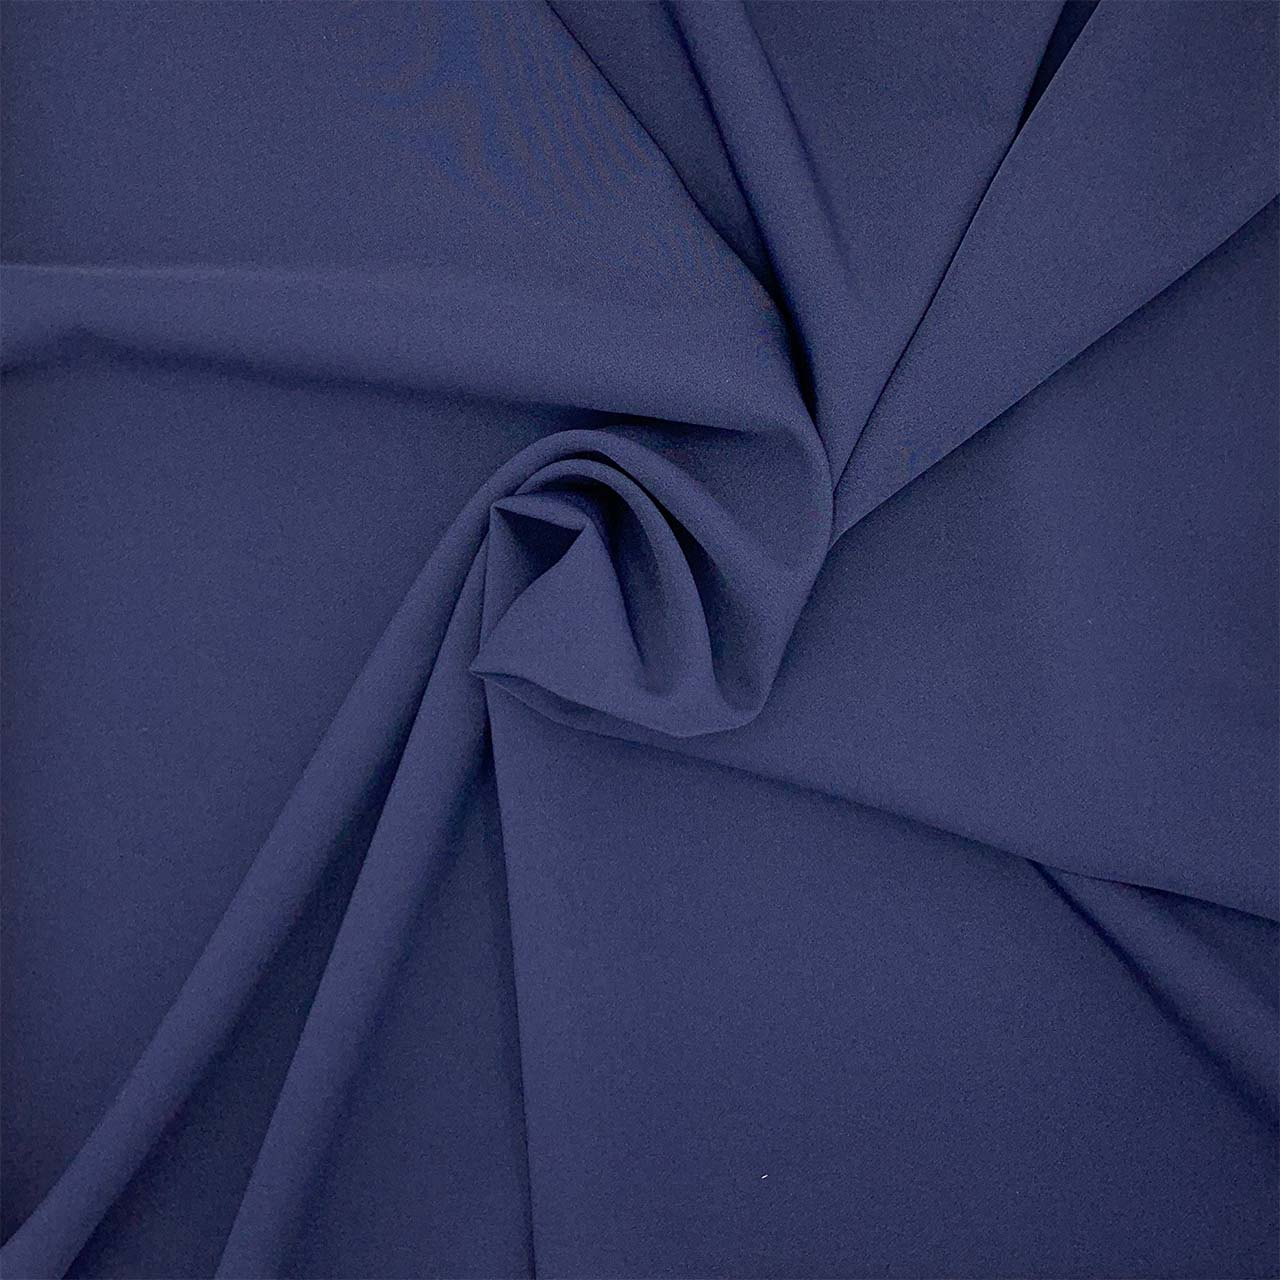 italian crepe fabric ink navy crepe fabric collection